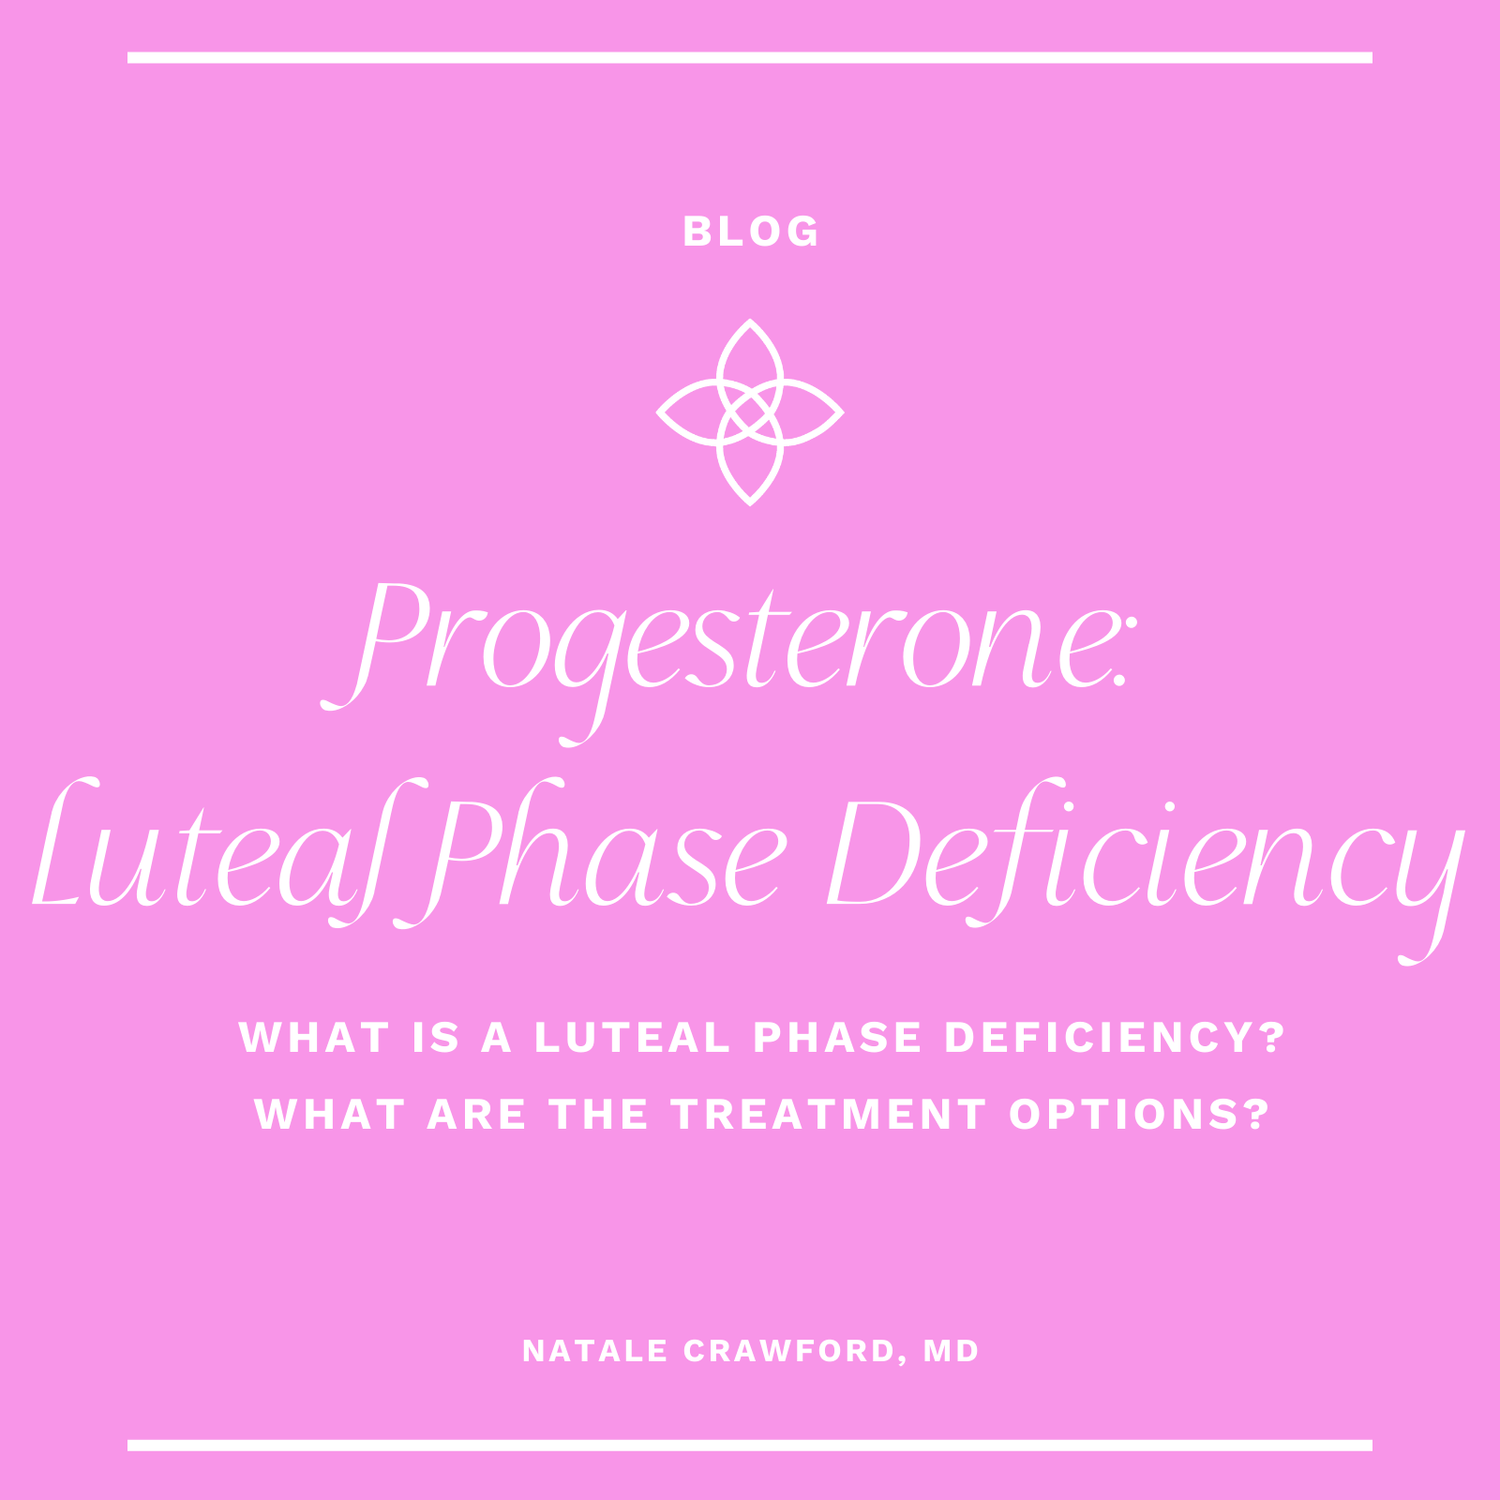 What is Luteal Phase Deficiency?